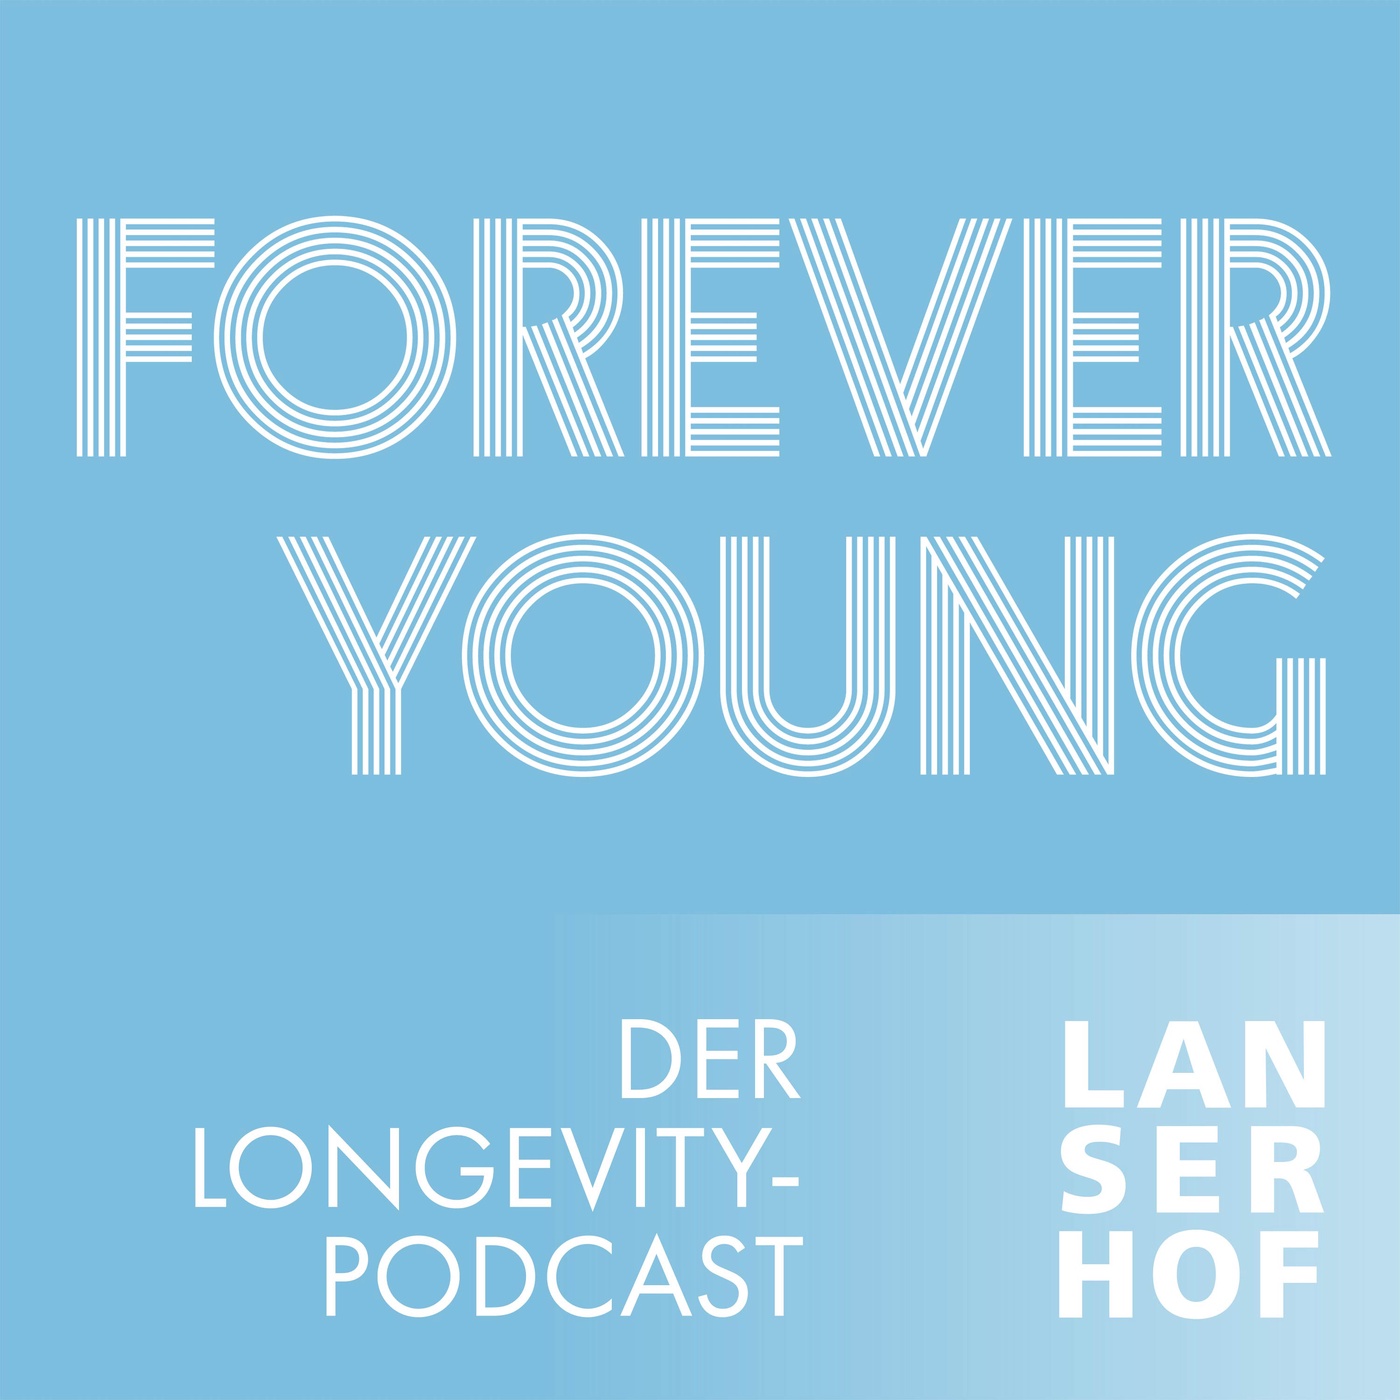 Forever Young - Der Longevity-Podcast